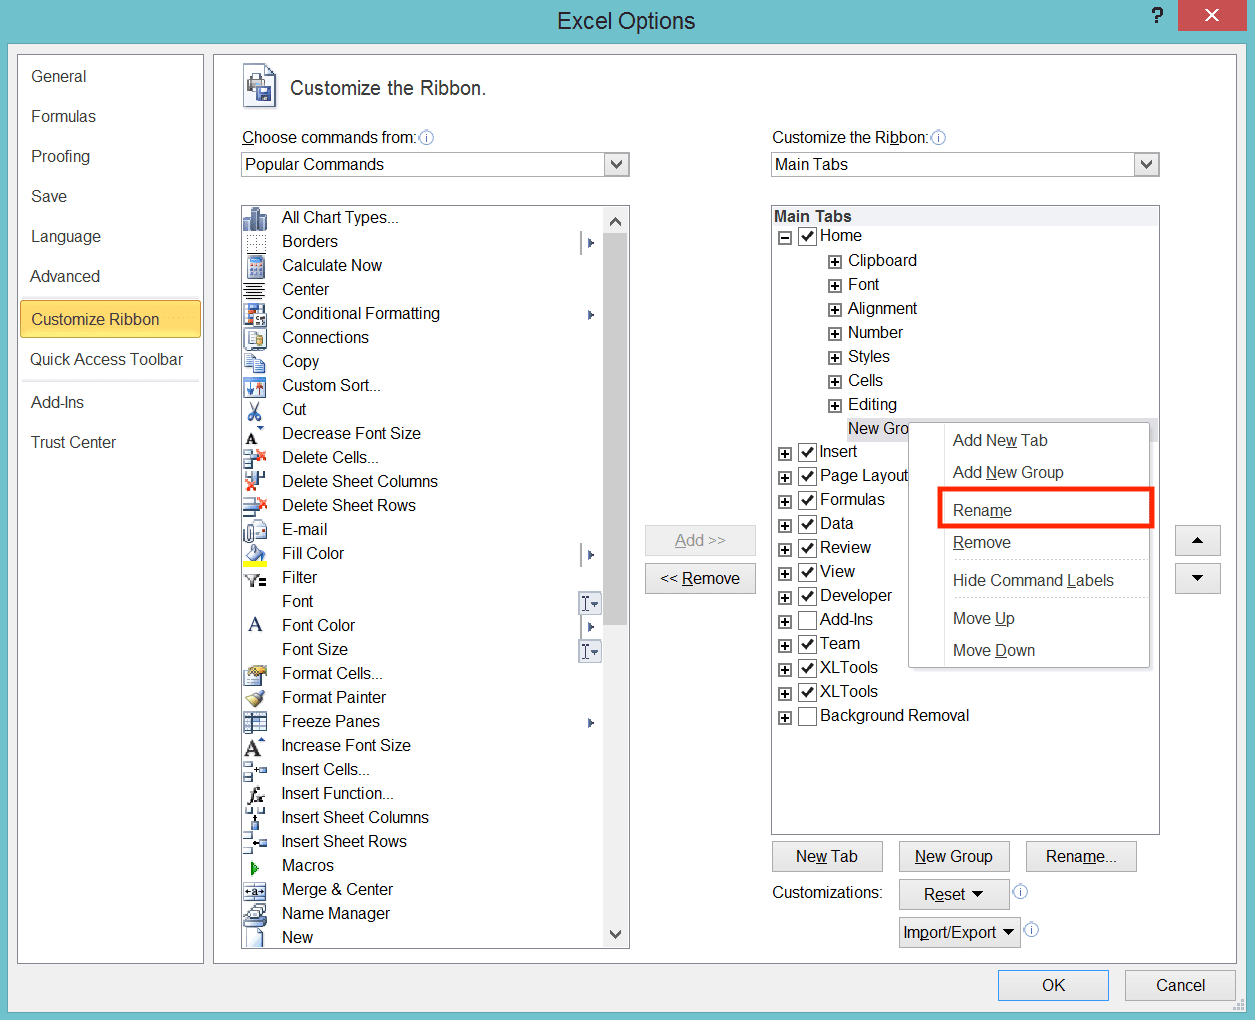 How to Make a Table in Excel - Screenshot of the New Group's Rename Option in the Customize the Ribbon... Dialog Box